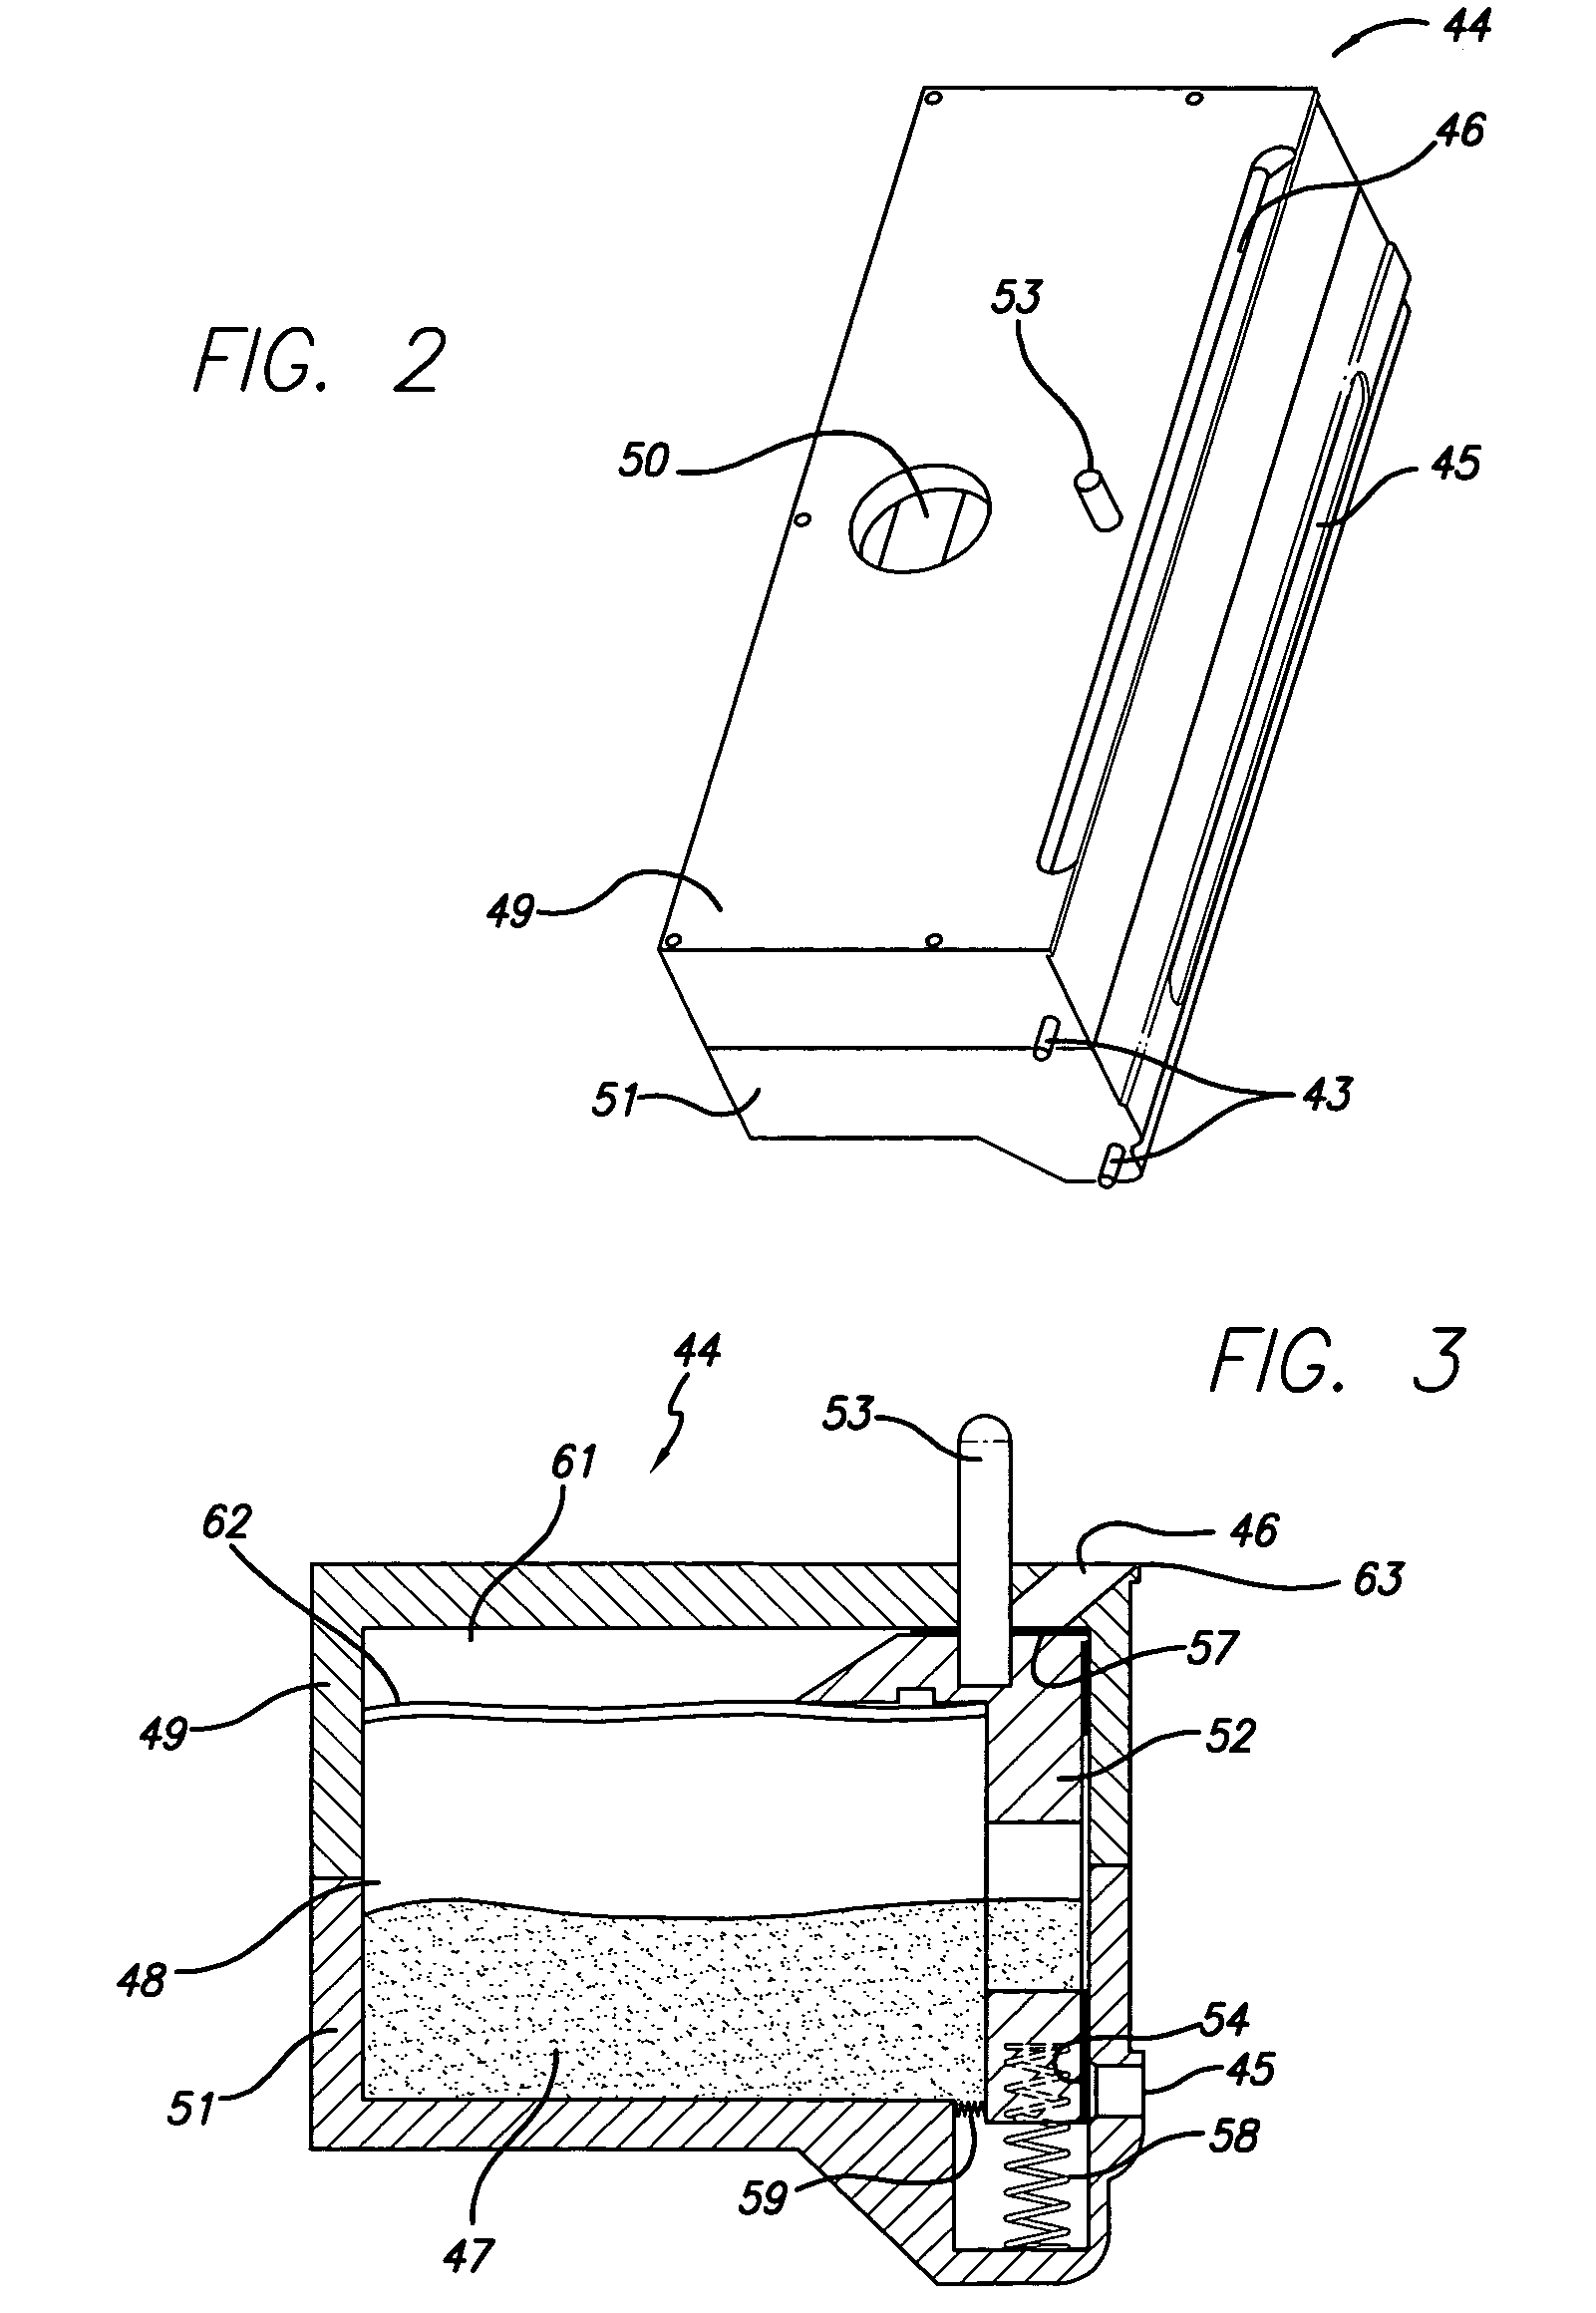 Material delivery system for use in solid imaging